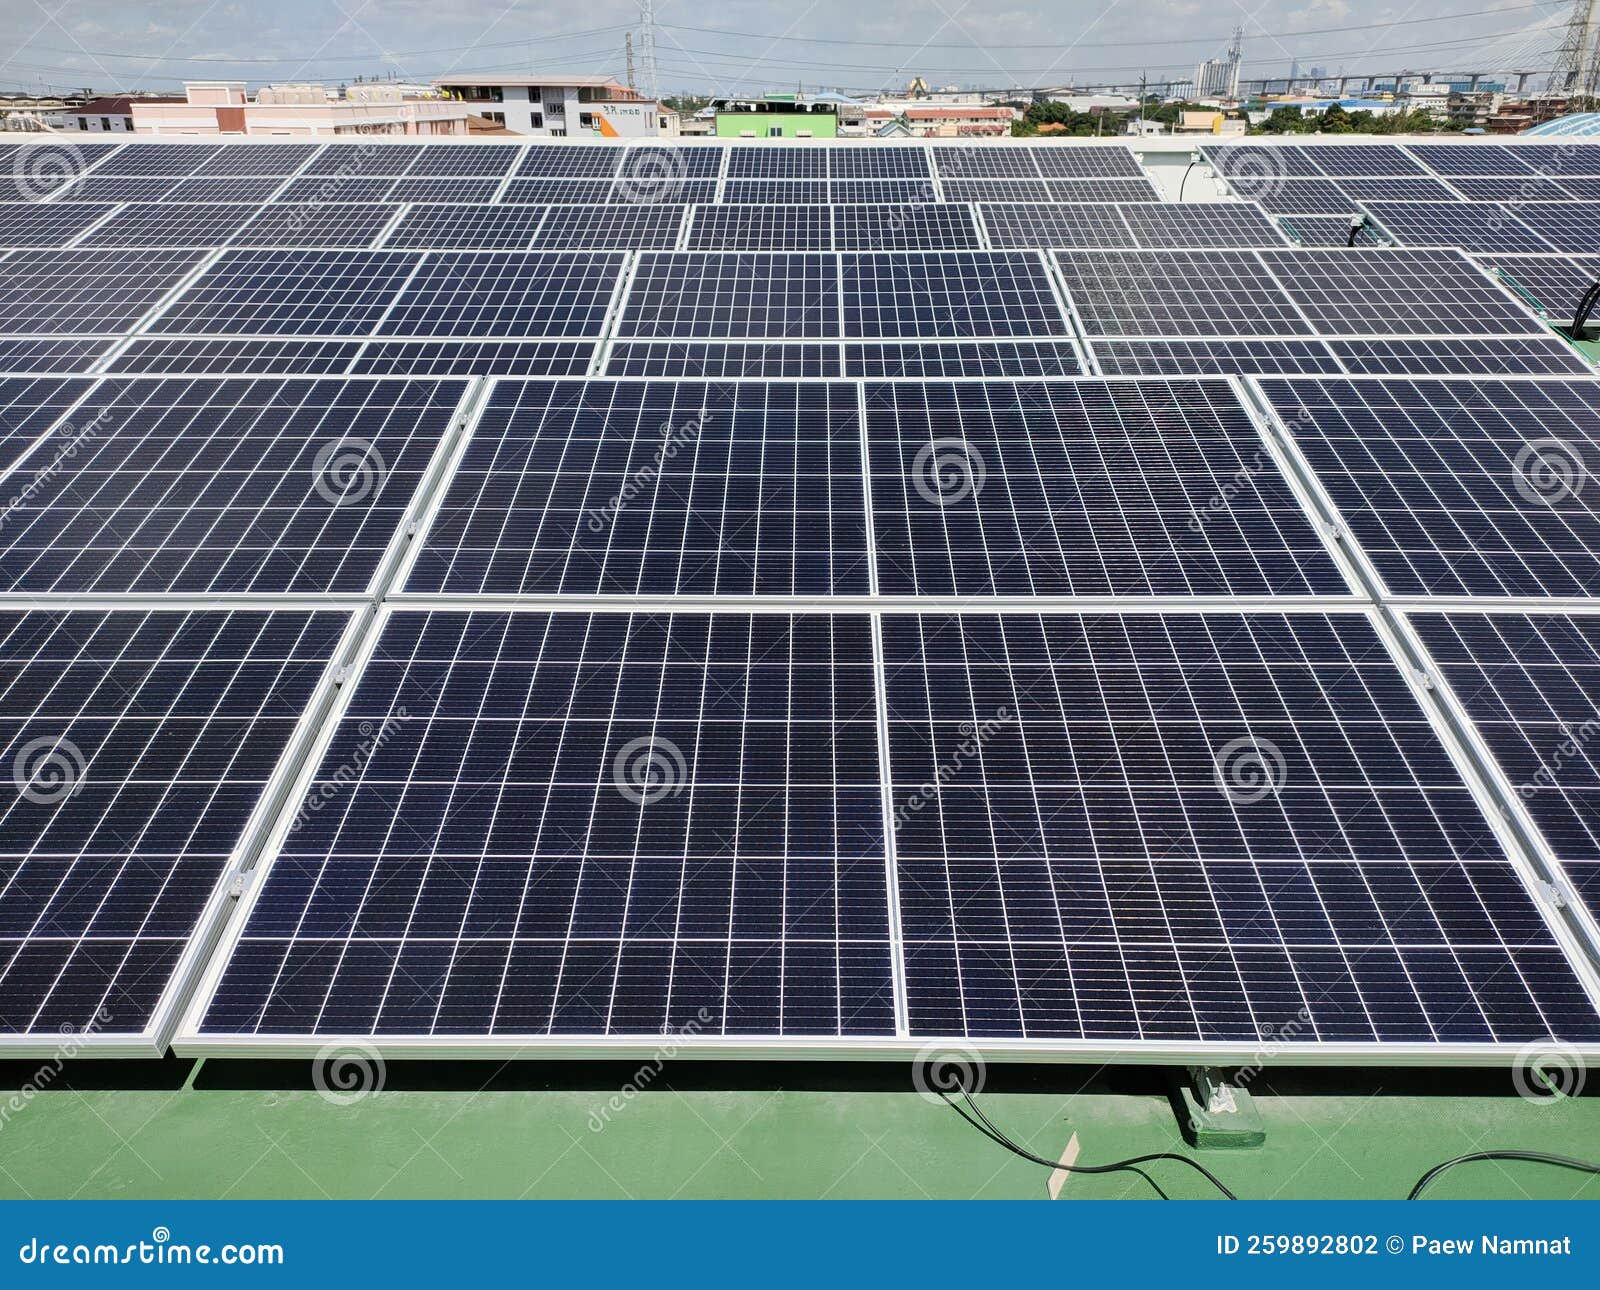 solar-panel-on-the-roof-stock-photo-image-of-installation-259892802